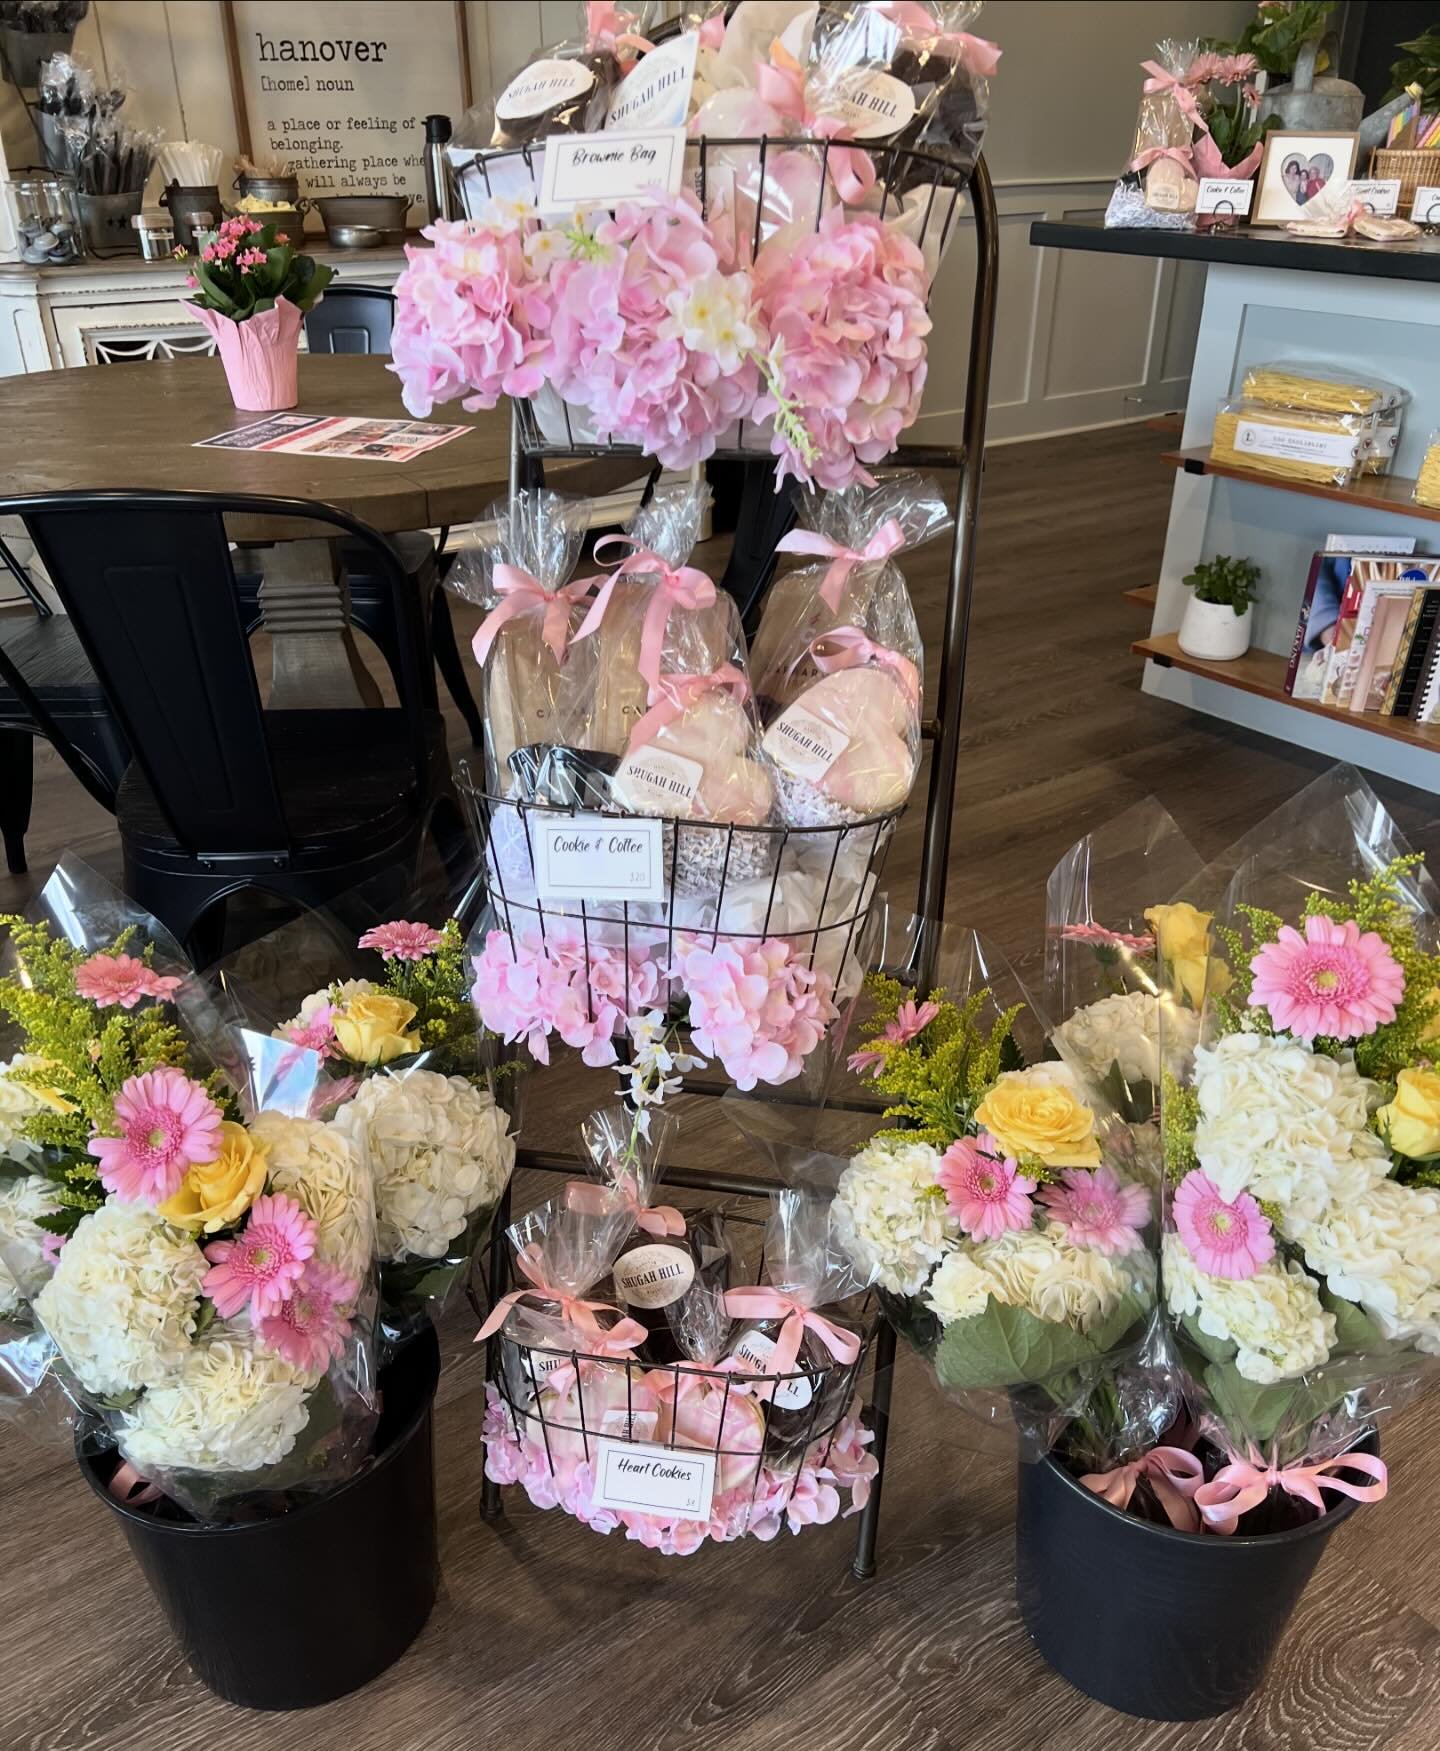 🌸Flowers and grab and go bags of goodies available for Mothers Day🌸
.
.
#mothersday #baking #flowers #bakery #hanoverma